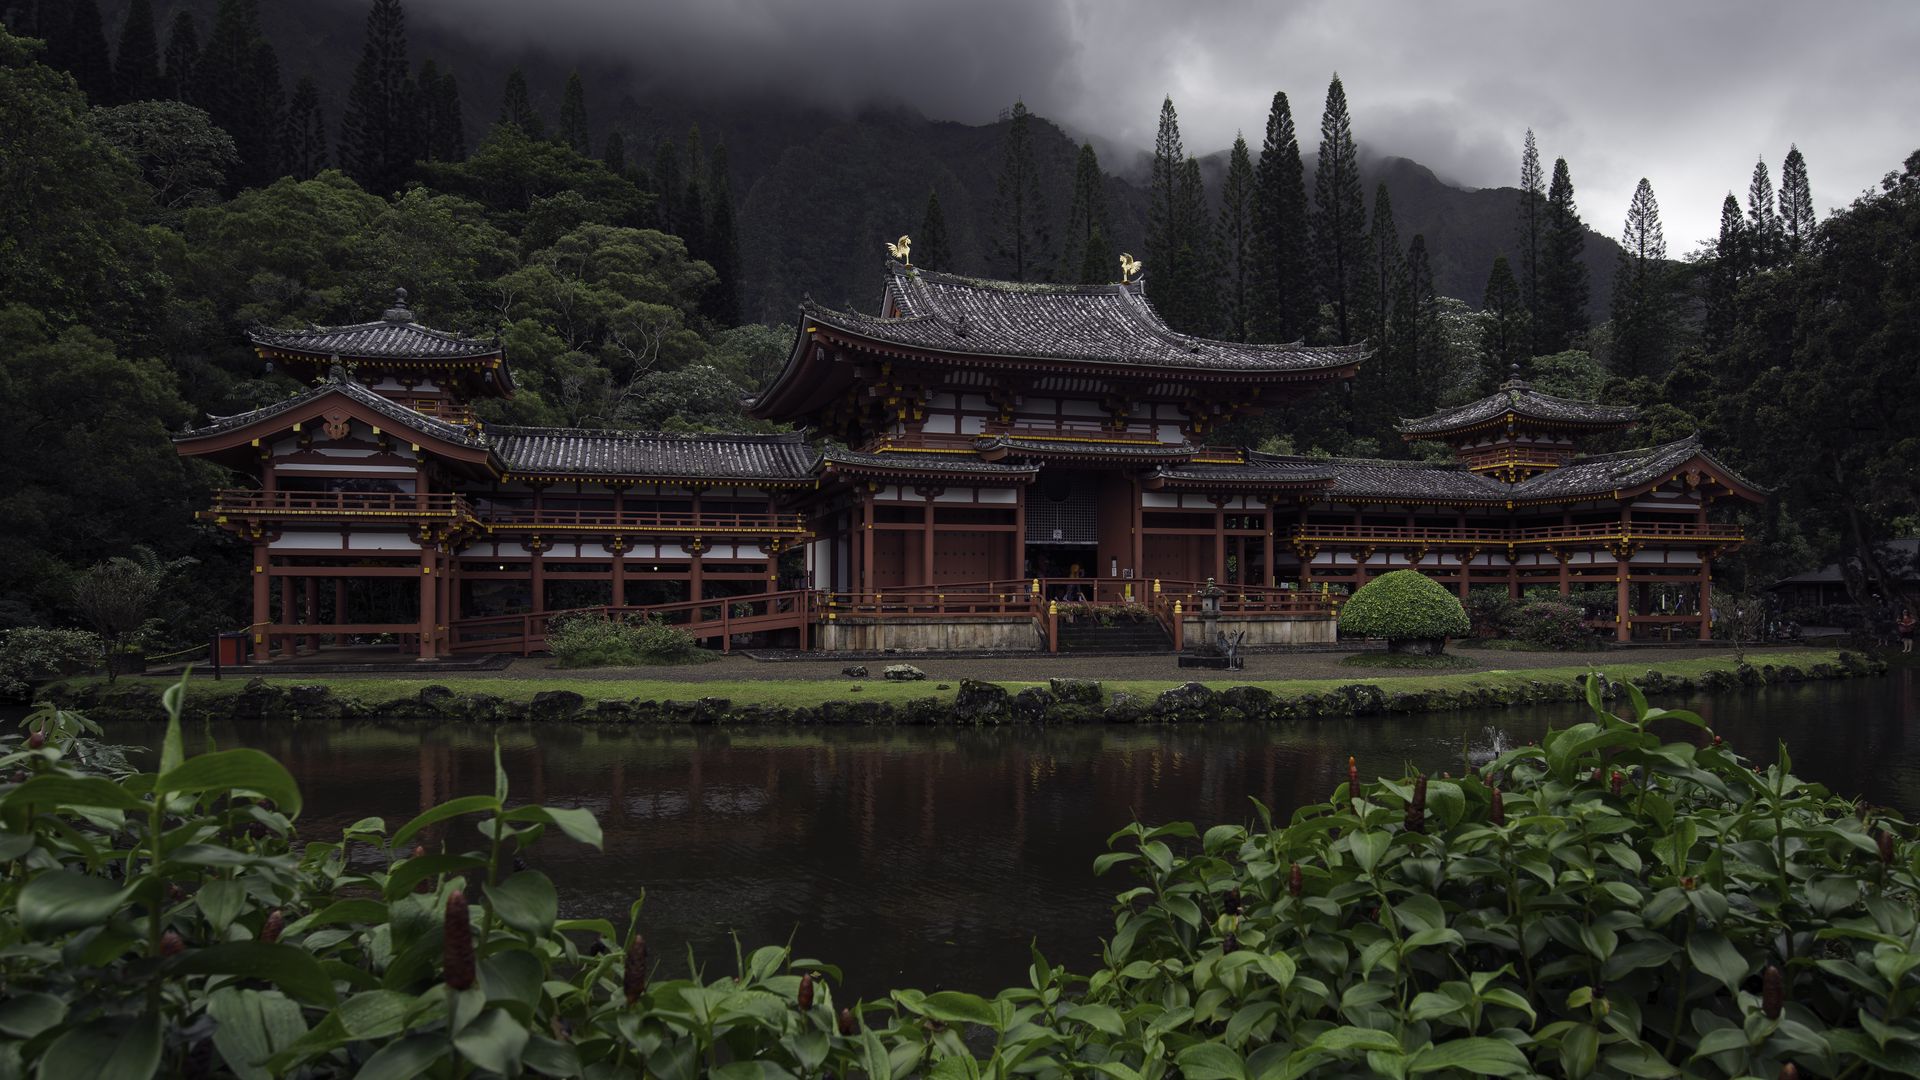 Download wallpaper 1920x1080 pagoda, architecture, pond, trees, asia ...